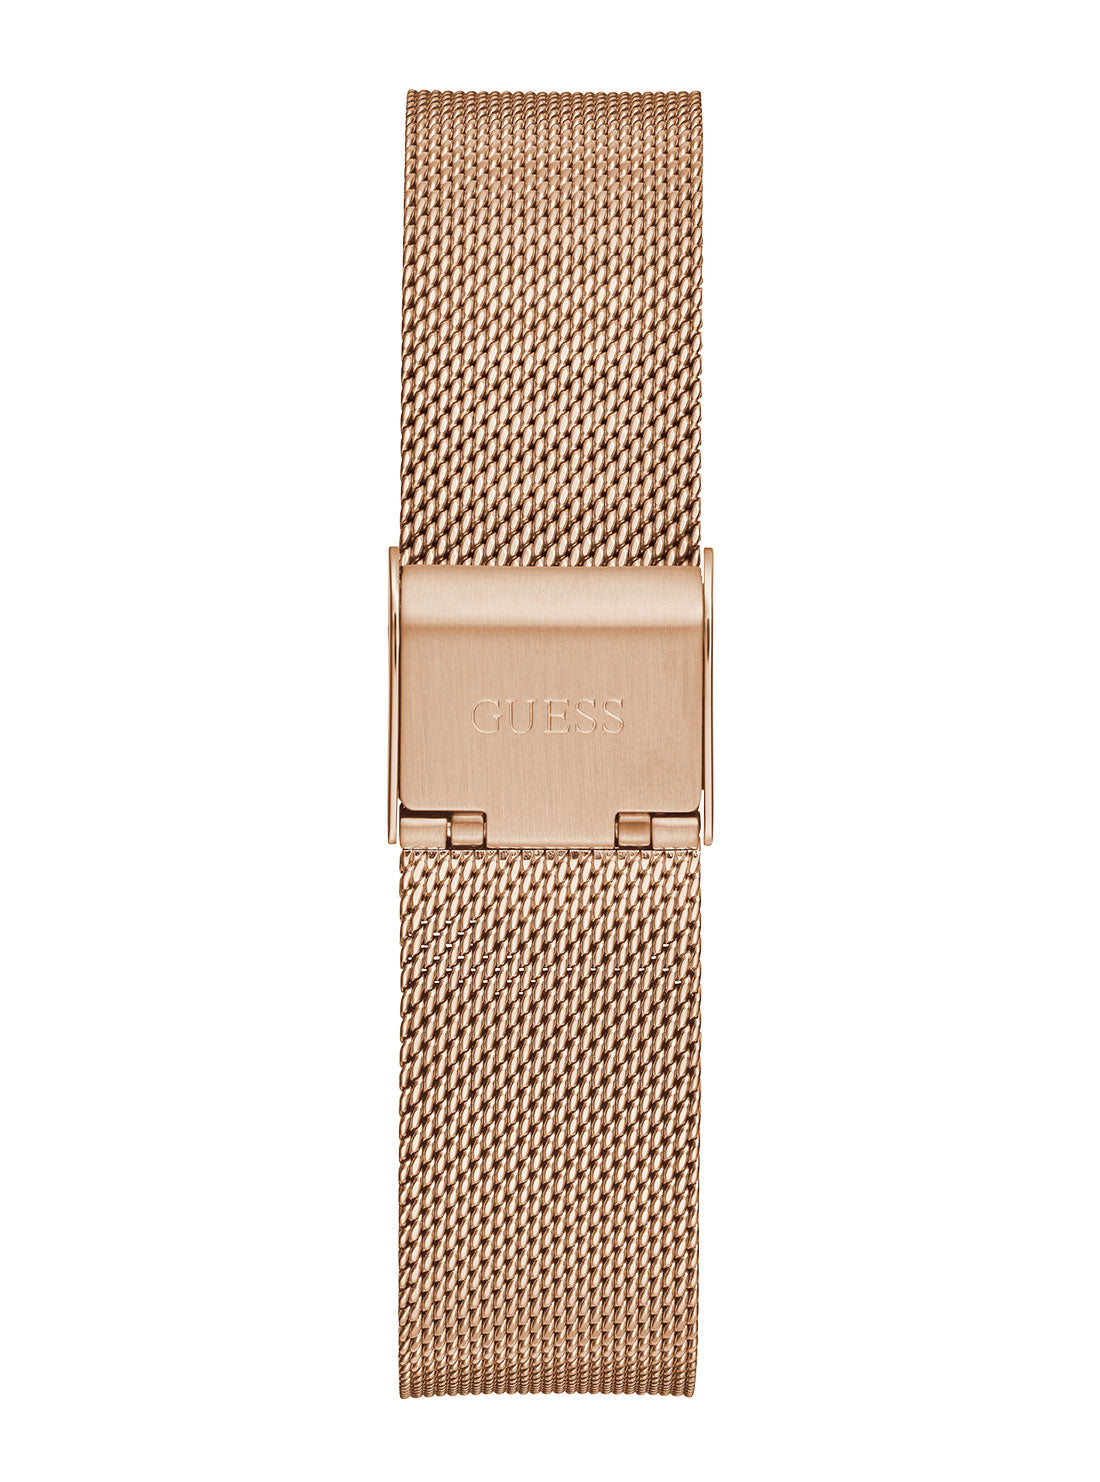 Rose Gold Iconic Crystal Mesh Watch